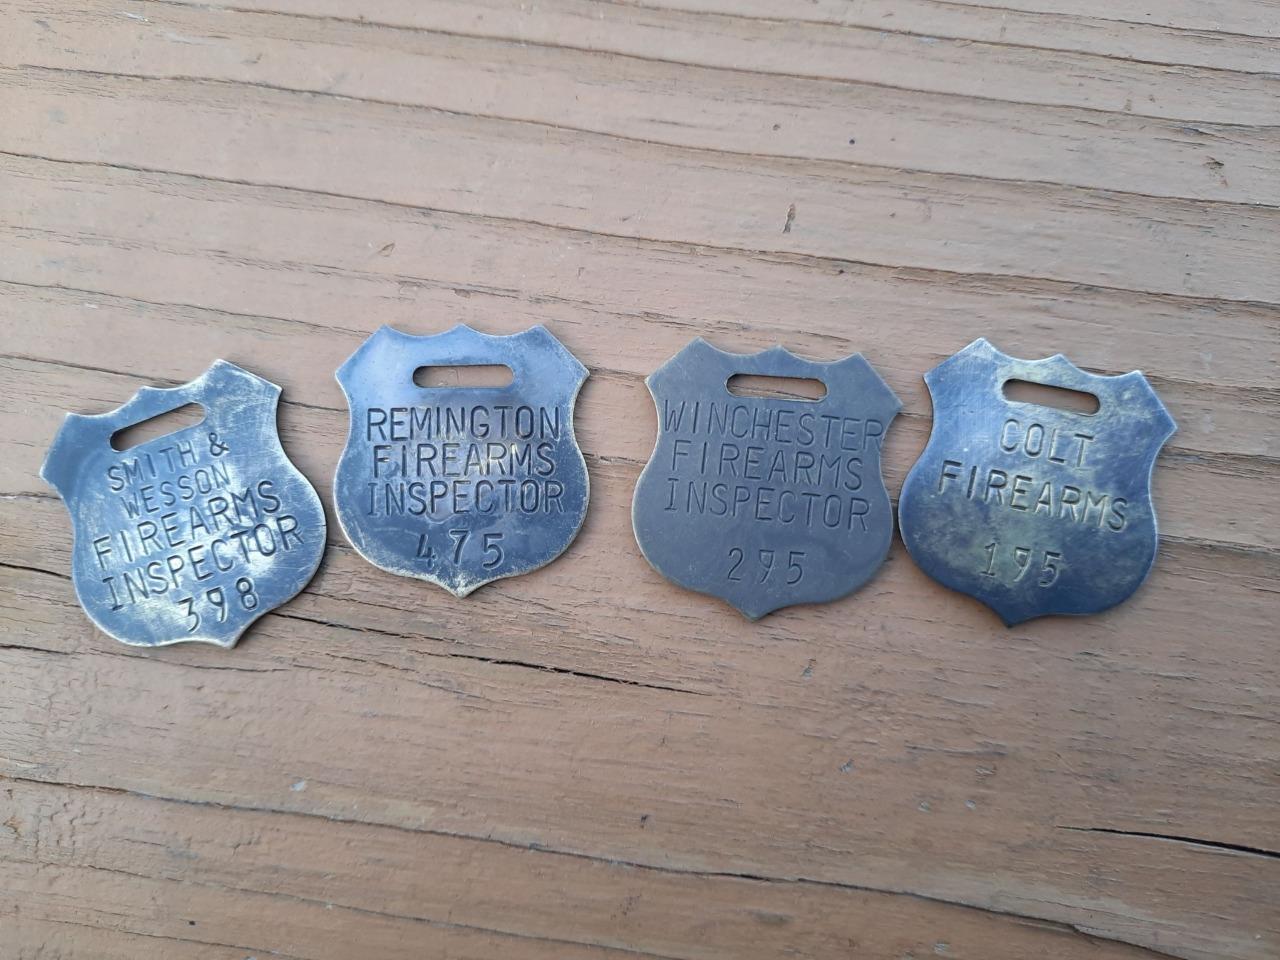 4 BRASS FIREARMS GUN TAGS FOBS COLT REMINGTON SMITH WESSON WINCHESTER WESTERN